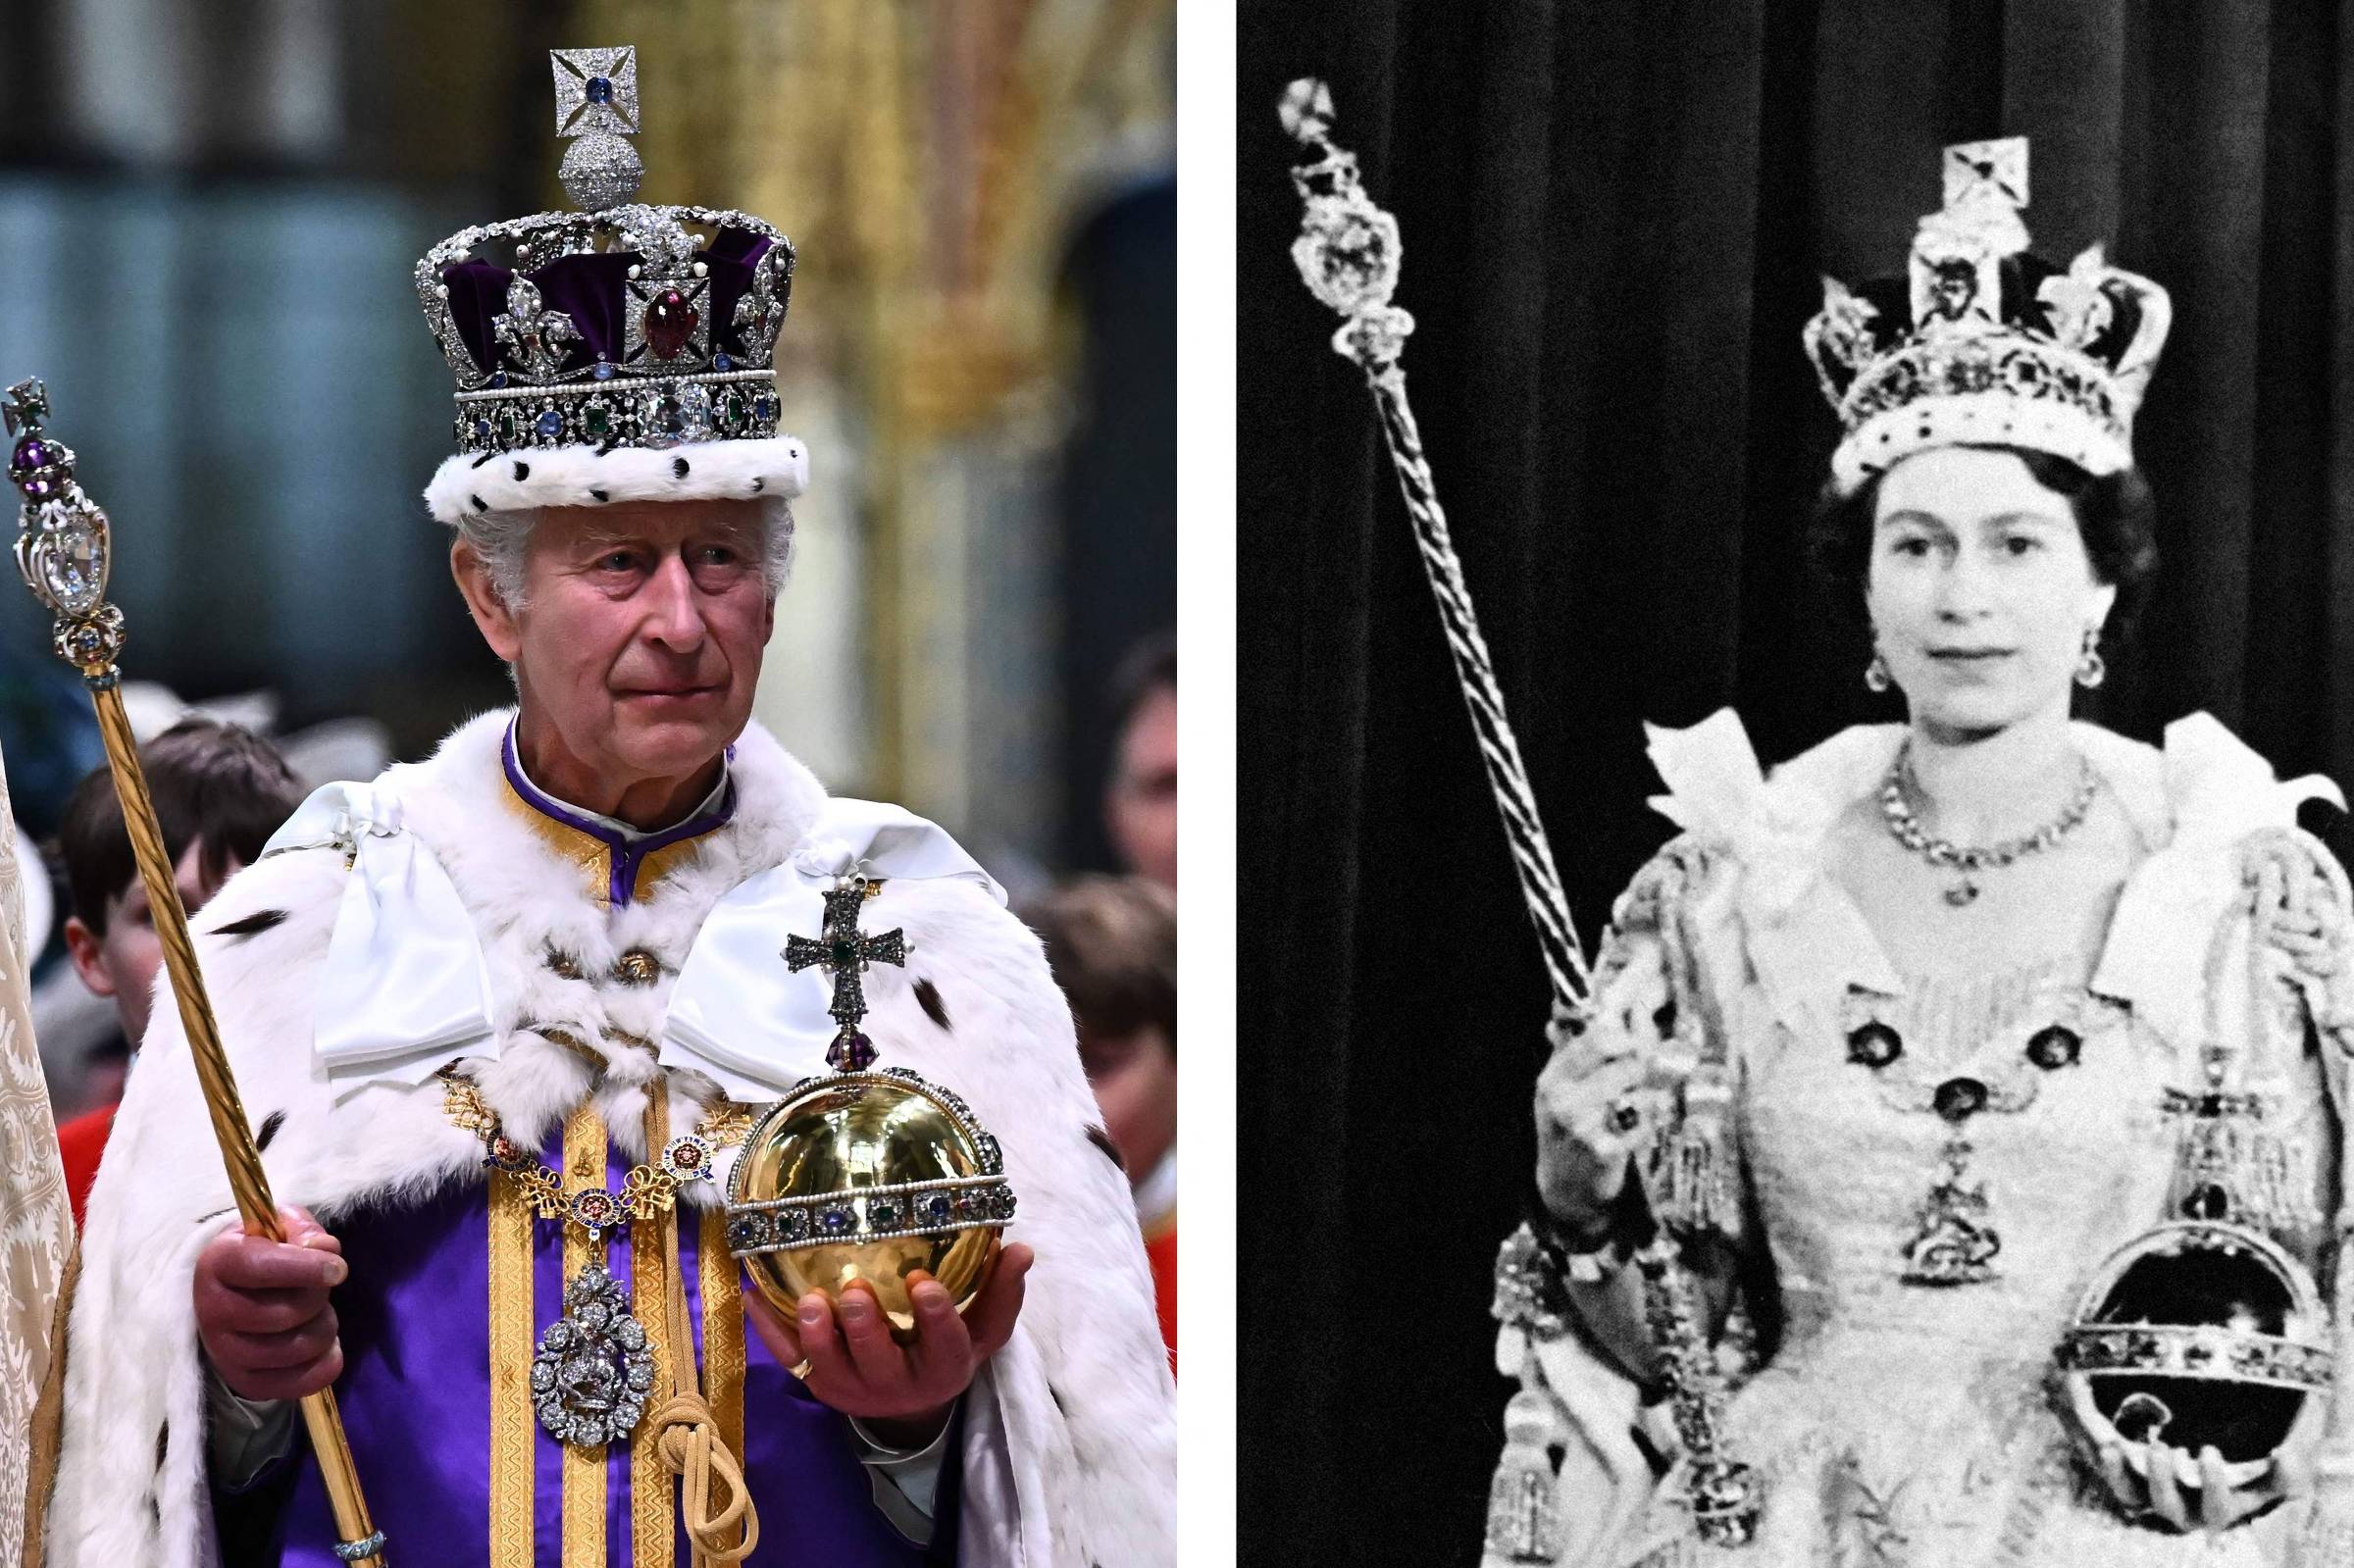 A year after Elizabeth’s death, Charles struggles to keep the monarchy relevant